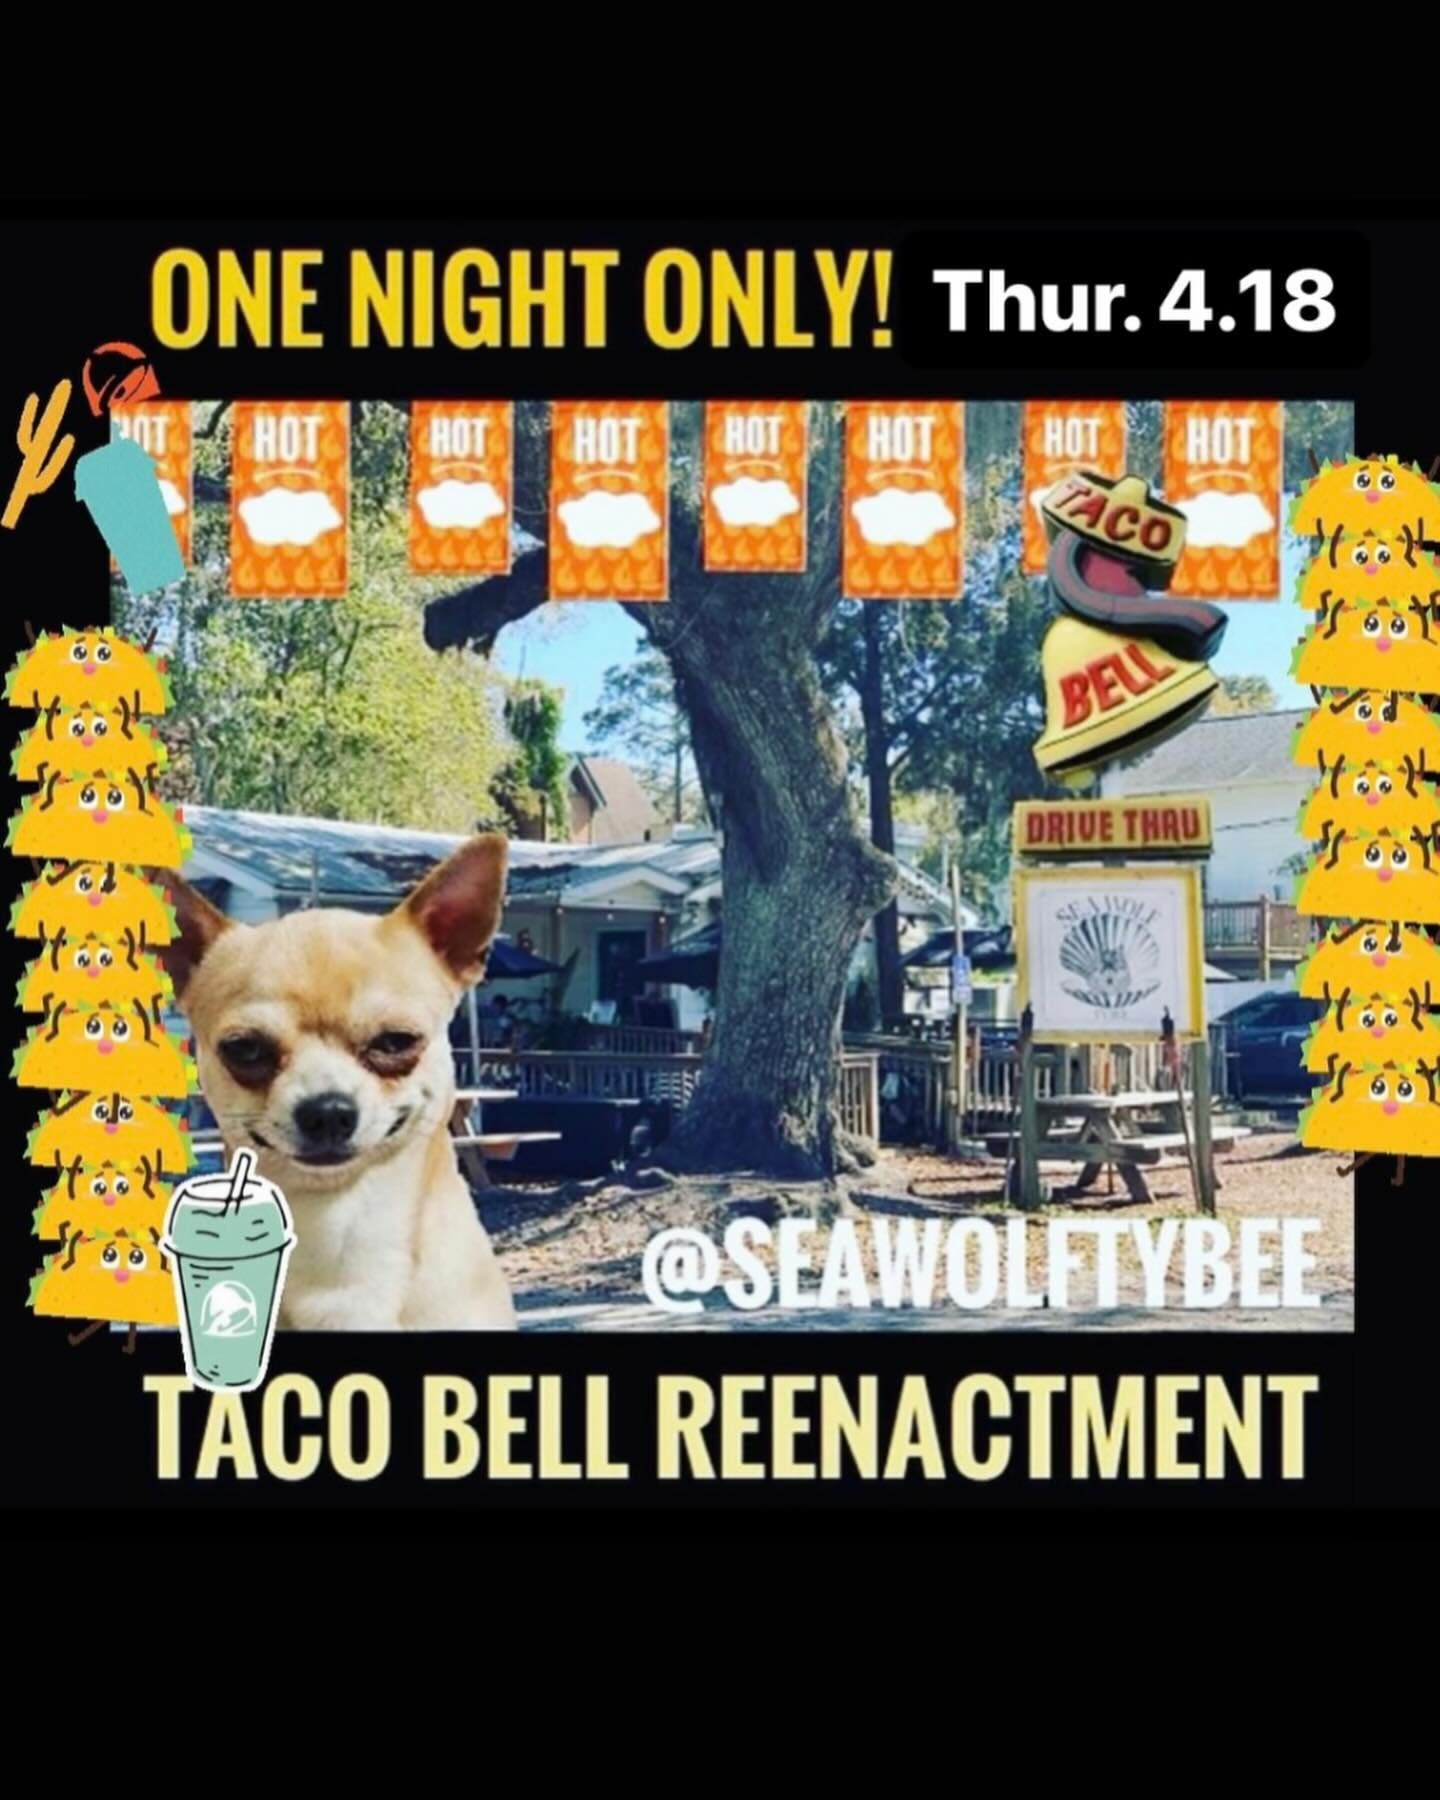 Join us one week from today 🔥 Thursday, April 18th 🌮 for our annual &ldquo;Taco Bell Reenactment&rdquo; at Sea Wolf Tybee!

We do this every year in honor of 4/20 💨 4/20 falls on a Saturday this year so we decided to move this event to the Thursda